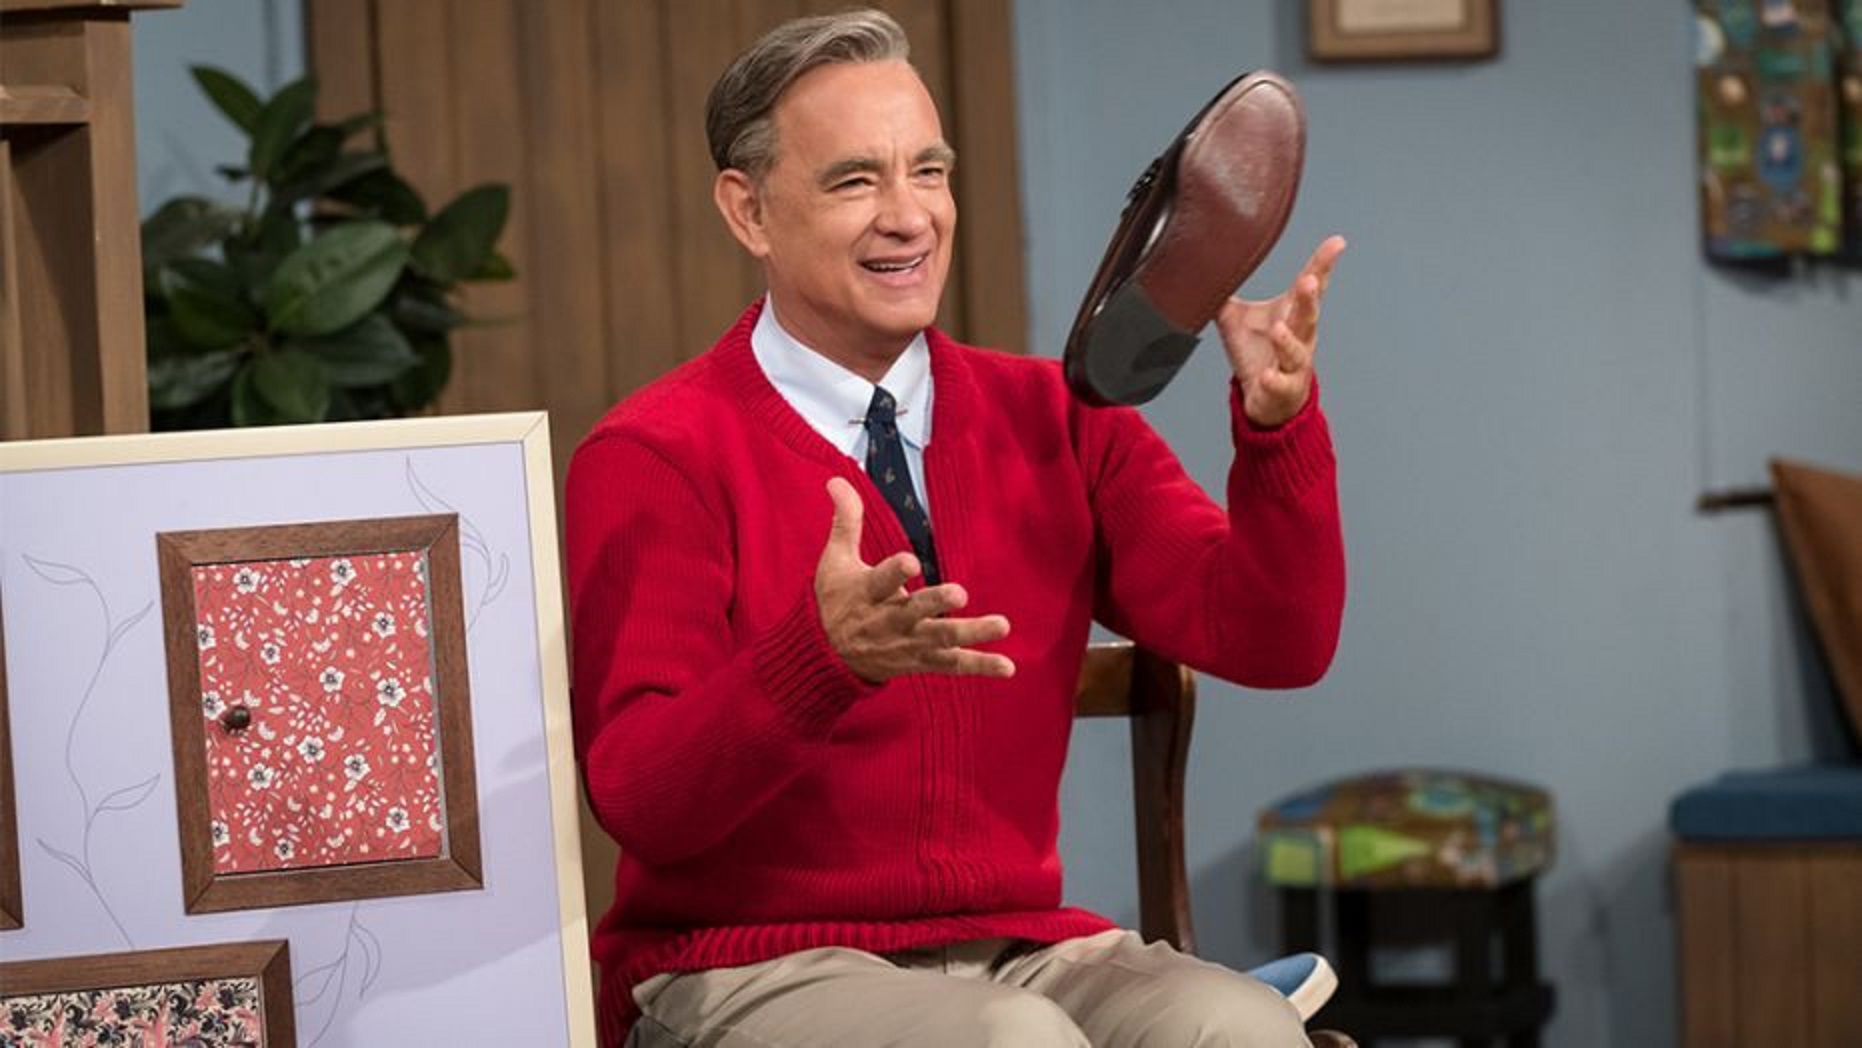 Watch: First Trailer For A Beautiful Day in the Neighborhood, Starring Tom Hanks as Mister Rogers